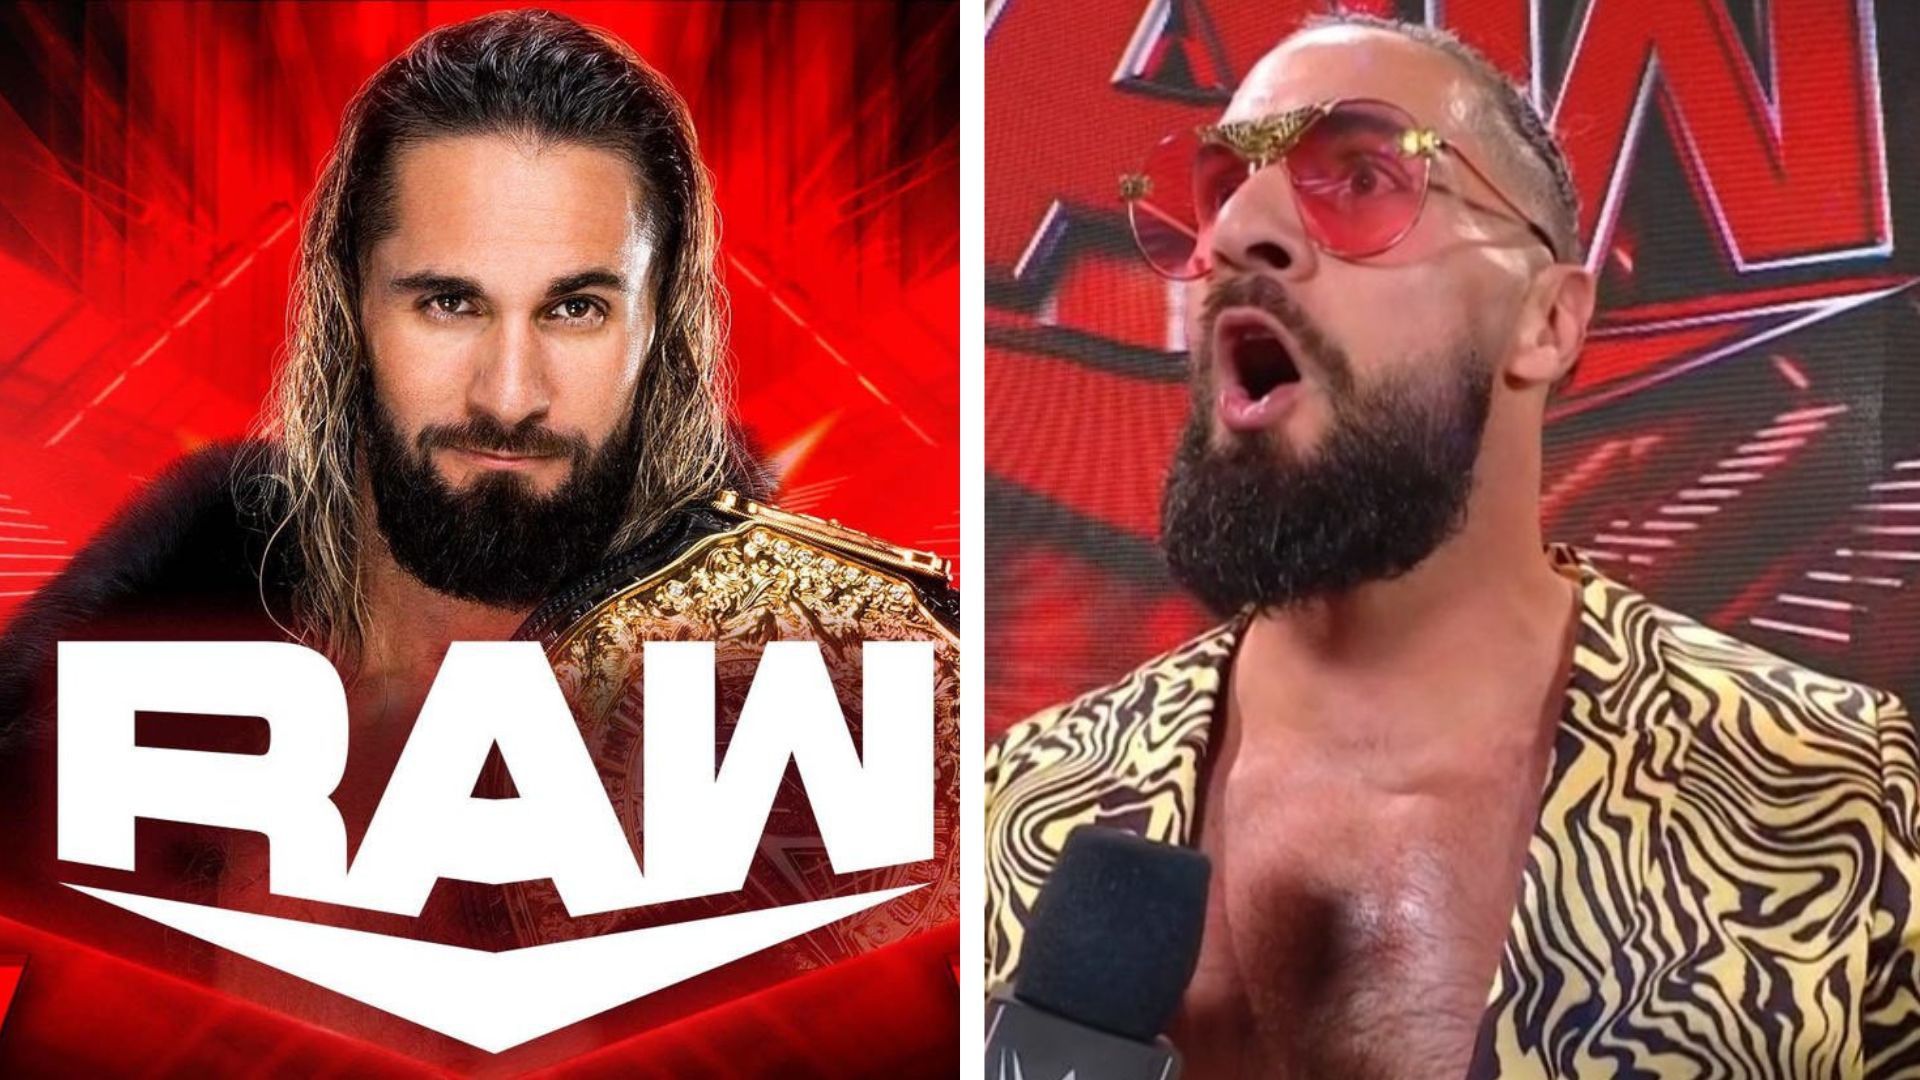 Seth Rollins is set for a title defence on RAW